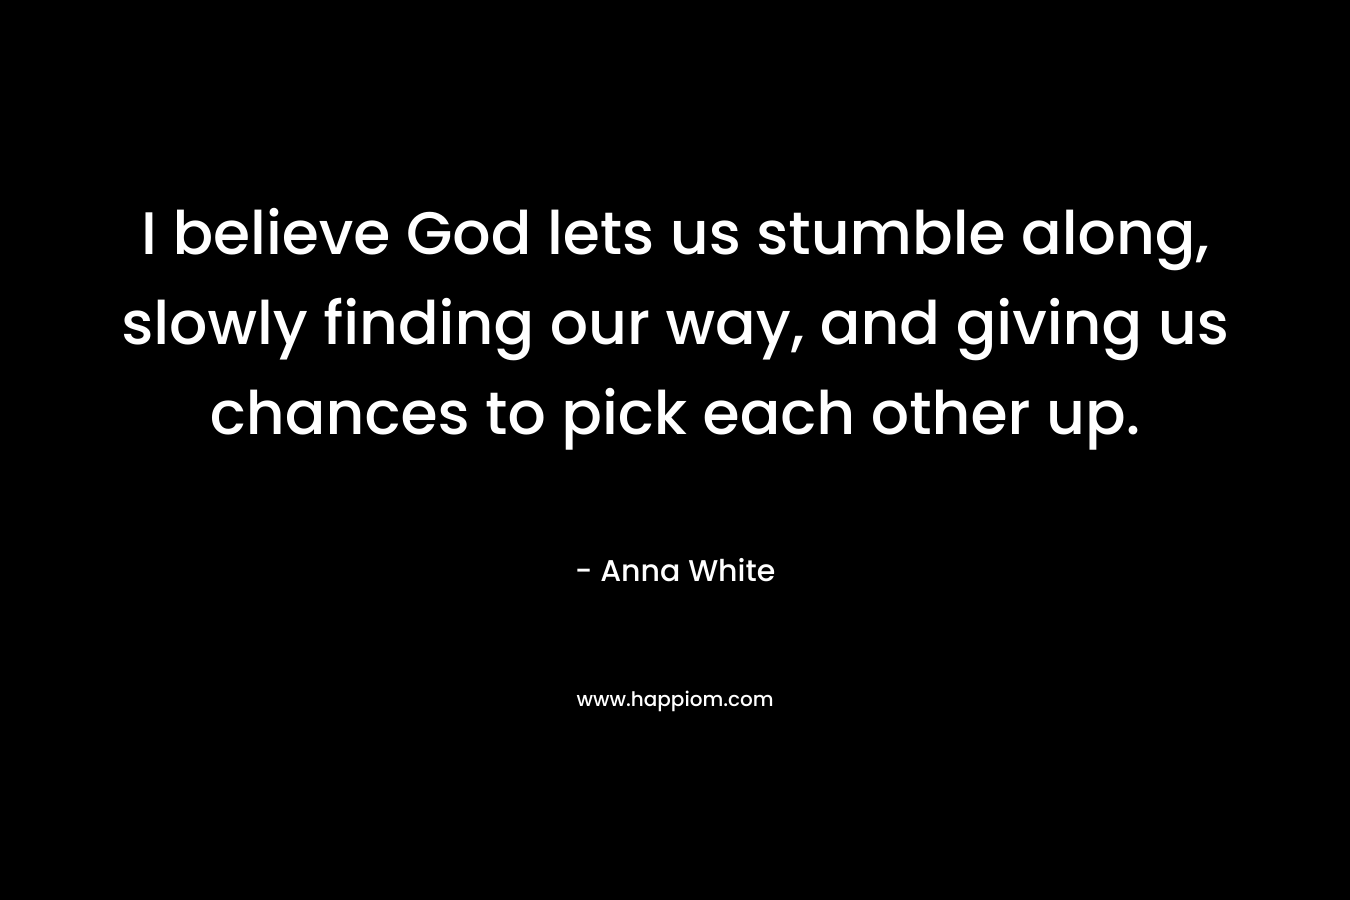 I believe God lets us stumble along, slowly finding our way, and giving us chances to pick each other up.